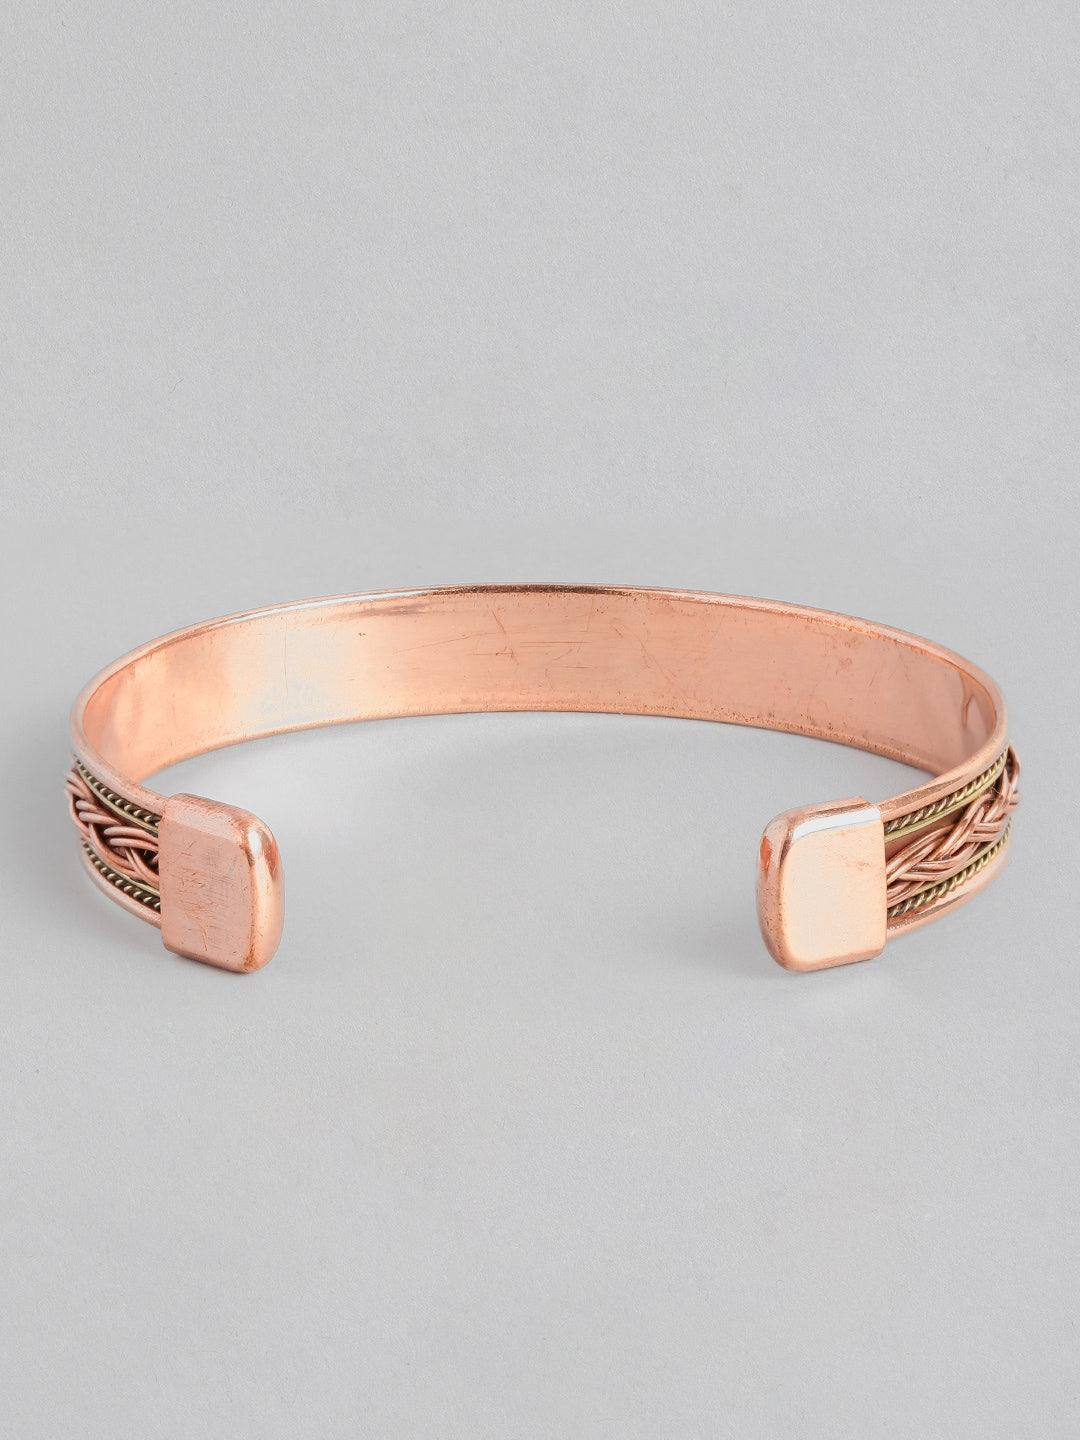 EL REGALO Men Copper-Toned & Gold-Toned Brass Handcrafted Brass-Plated Cuff Bracelet - for Men
Style ID: 15980608